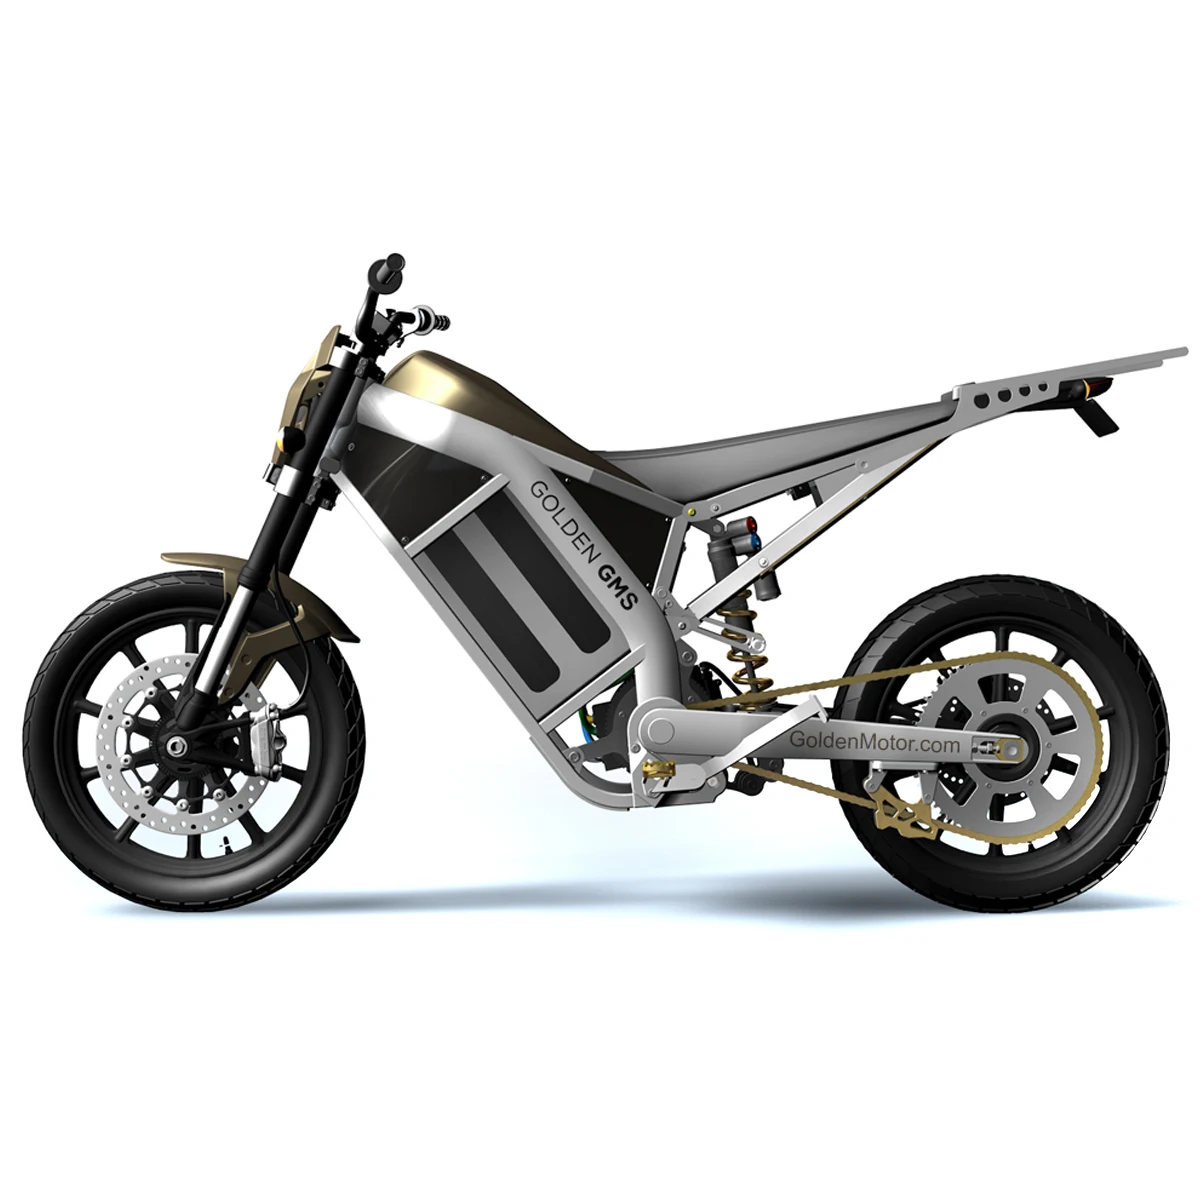 Electric racing motorcycle True Sine Wave control 72V-3KW 5KW 10KW 120kmh 100KM range 98kg brushless and gear less